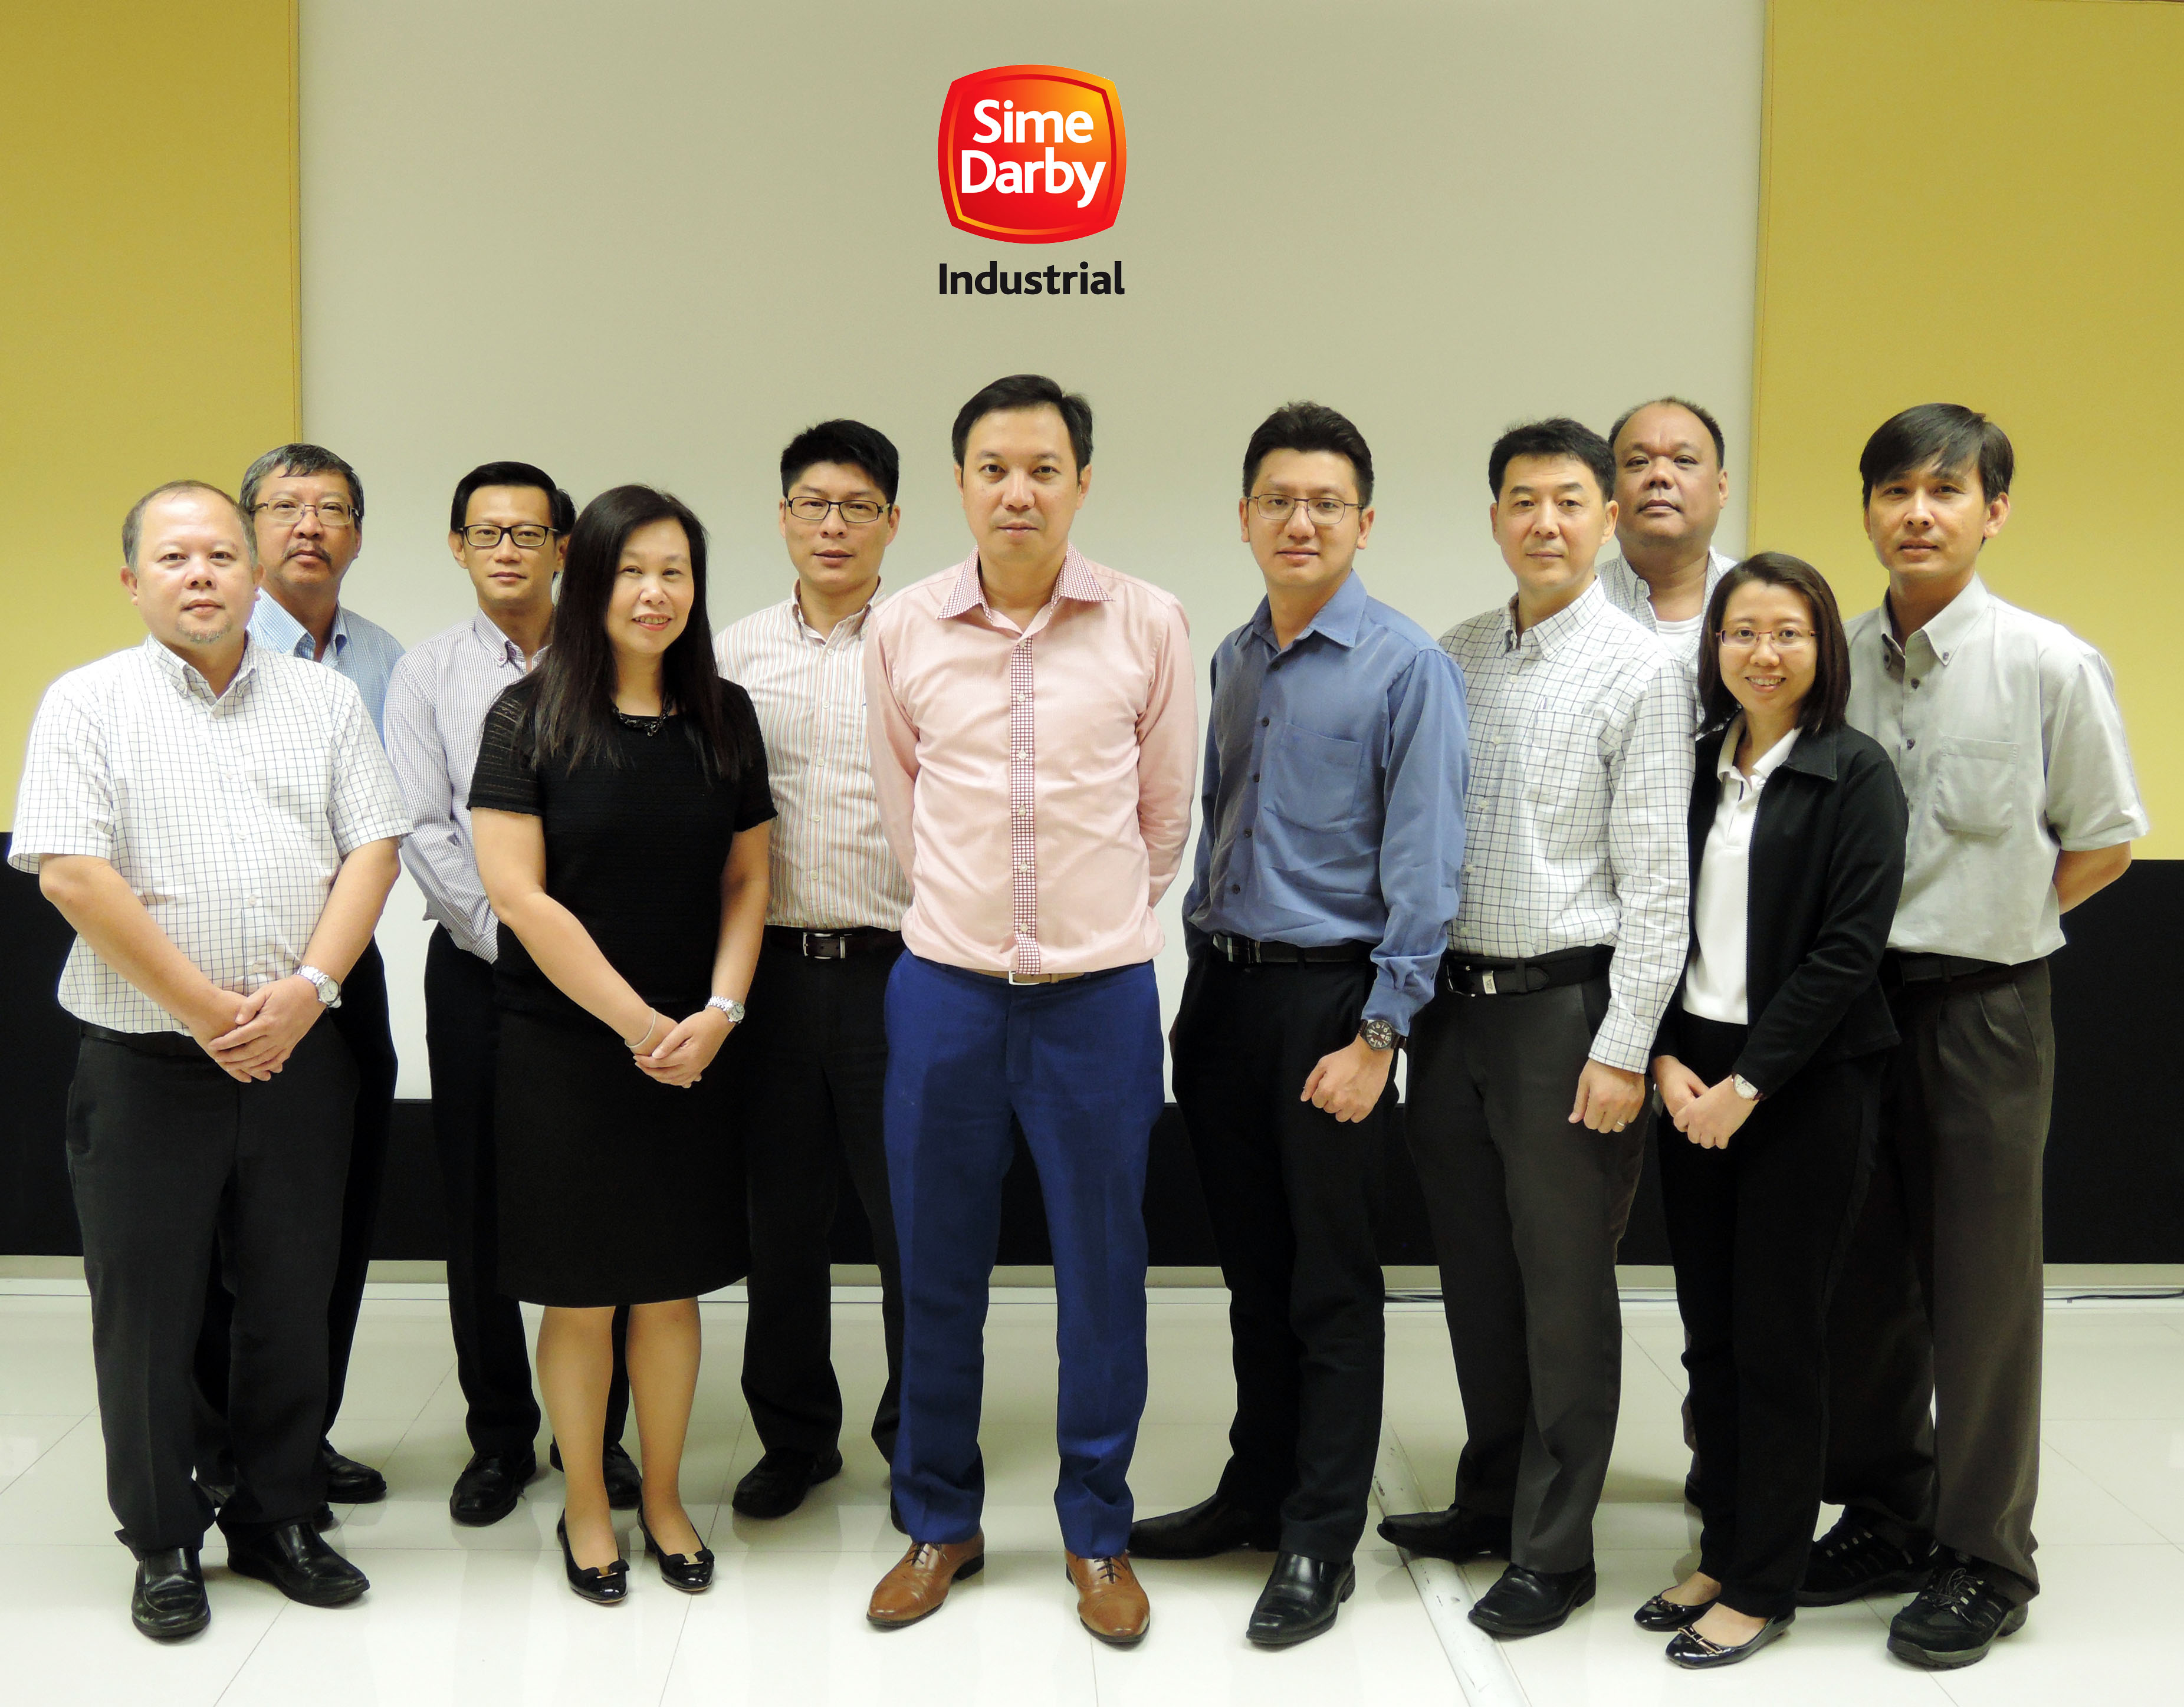 The Tractors Singapore Limited team, with full support from the Sime Darby Power Systems Management